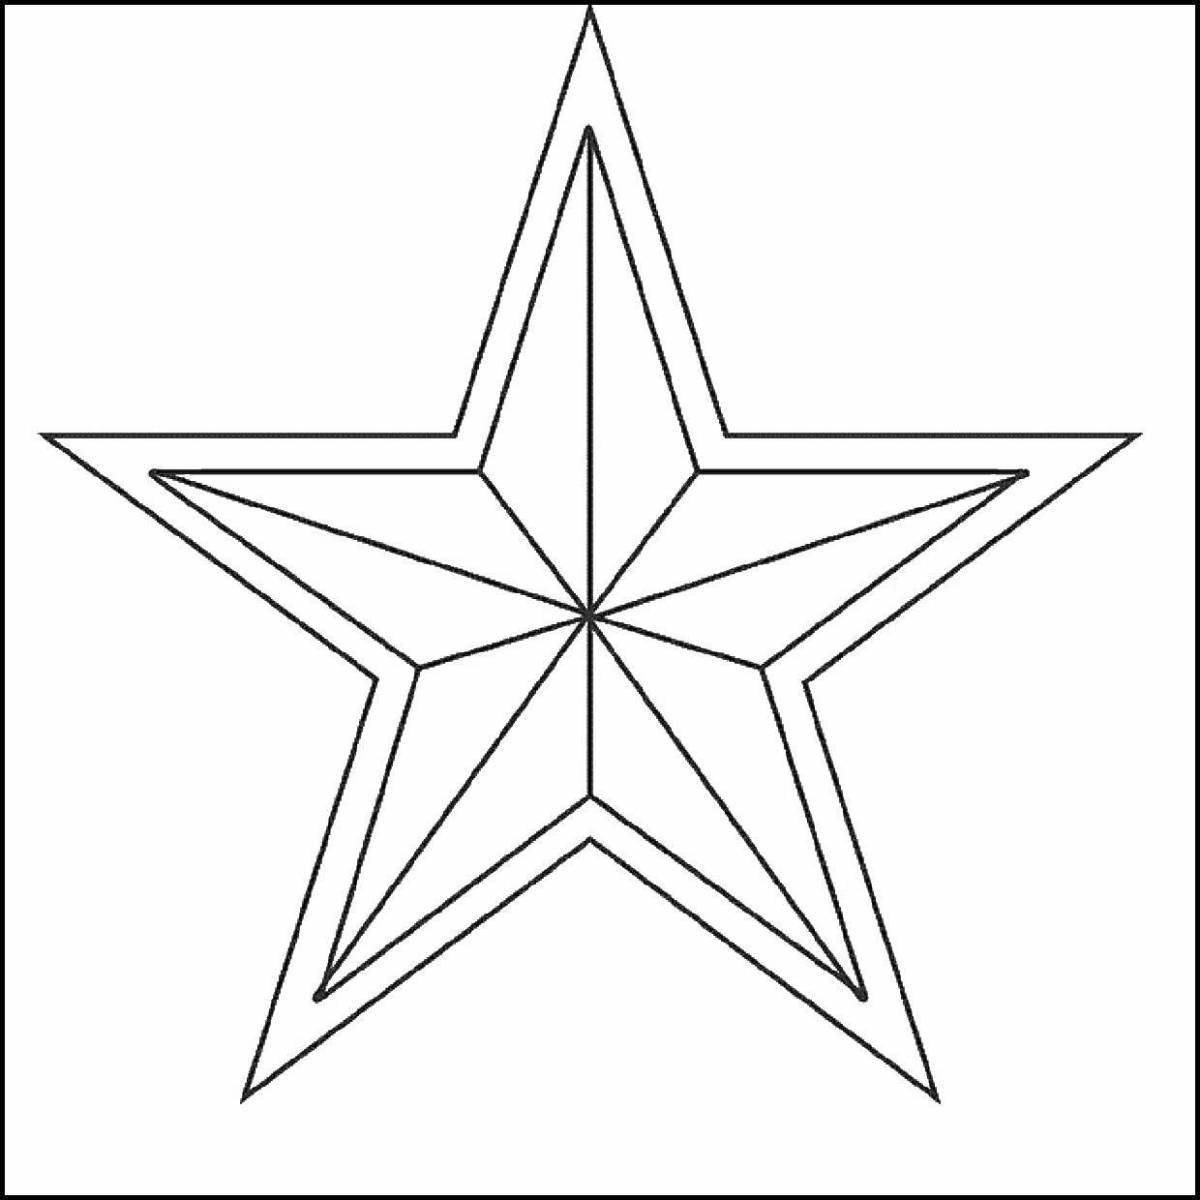 Coloring book bewitching ussr star